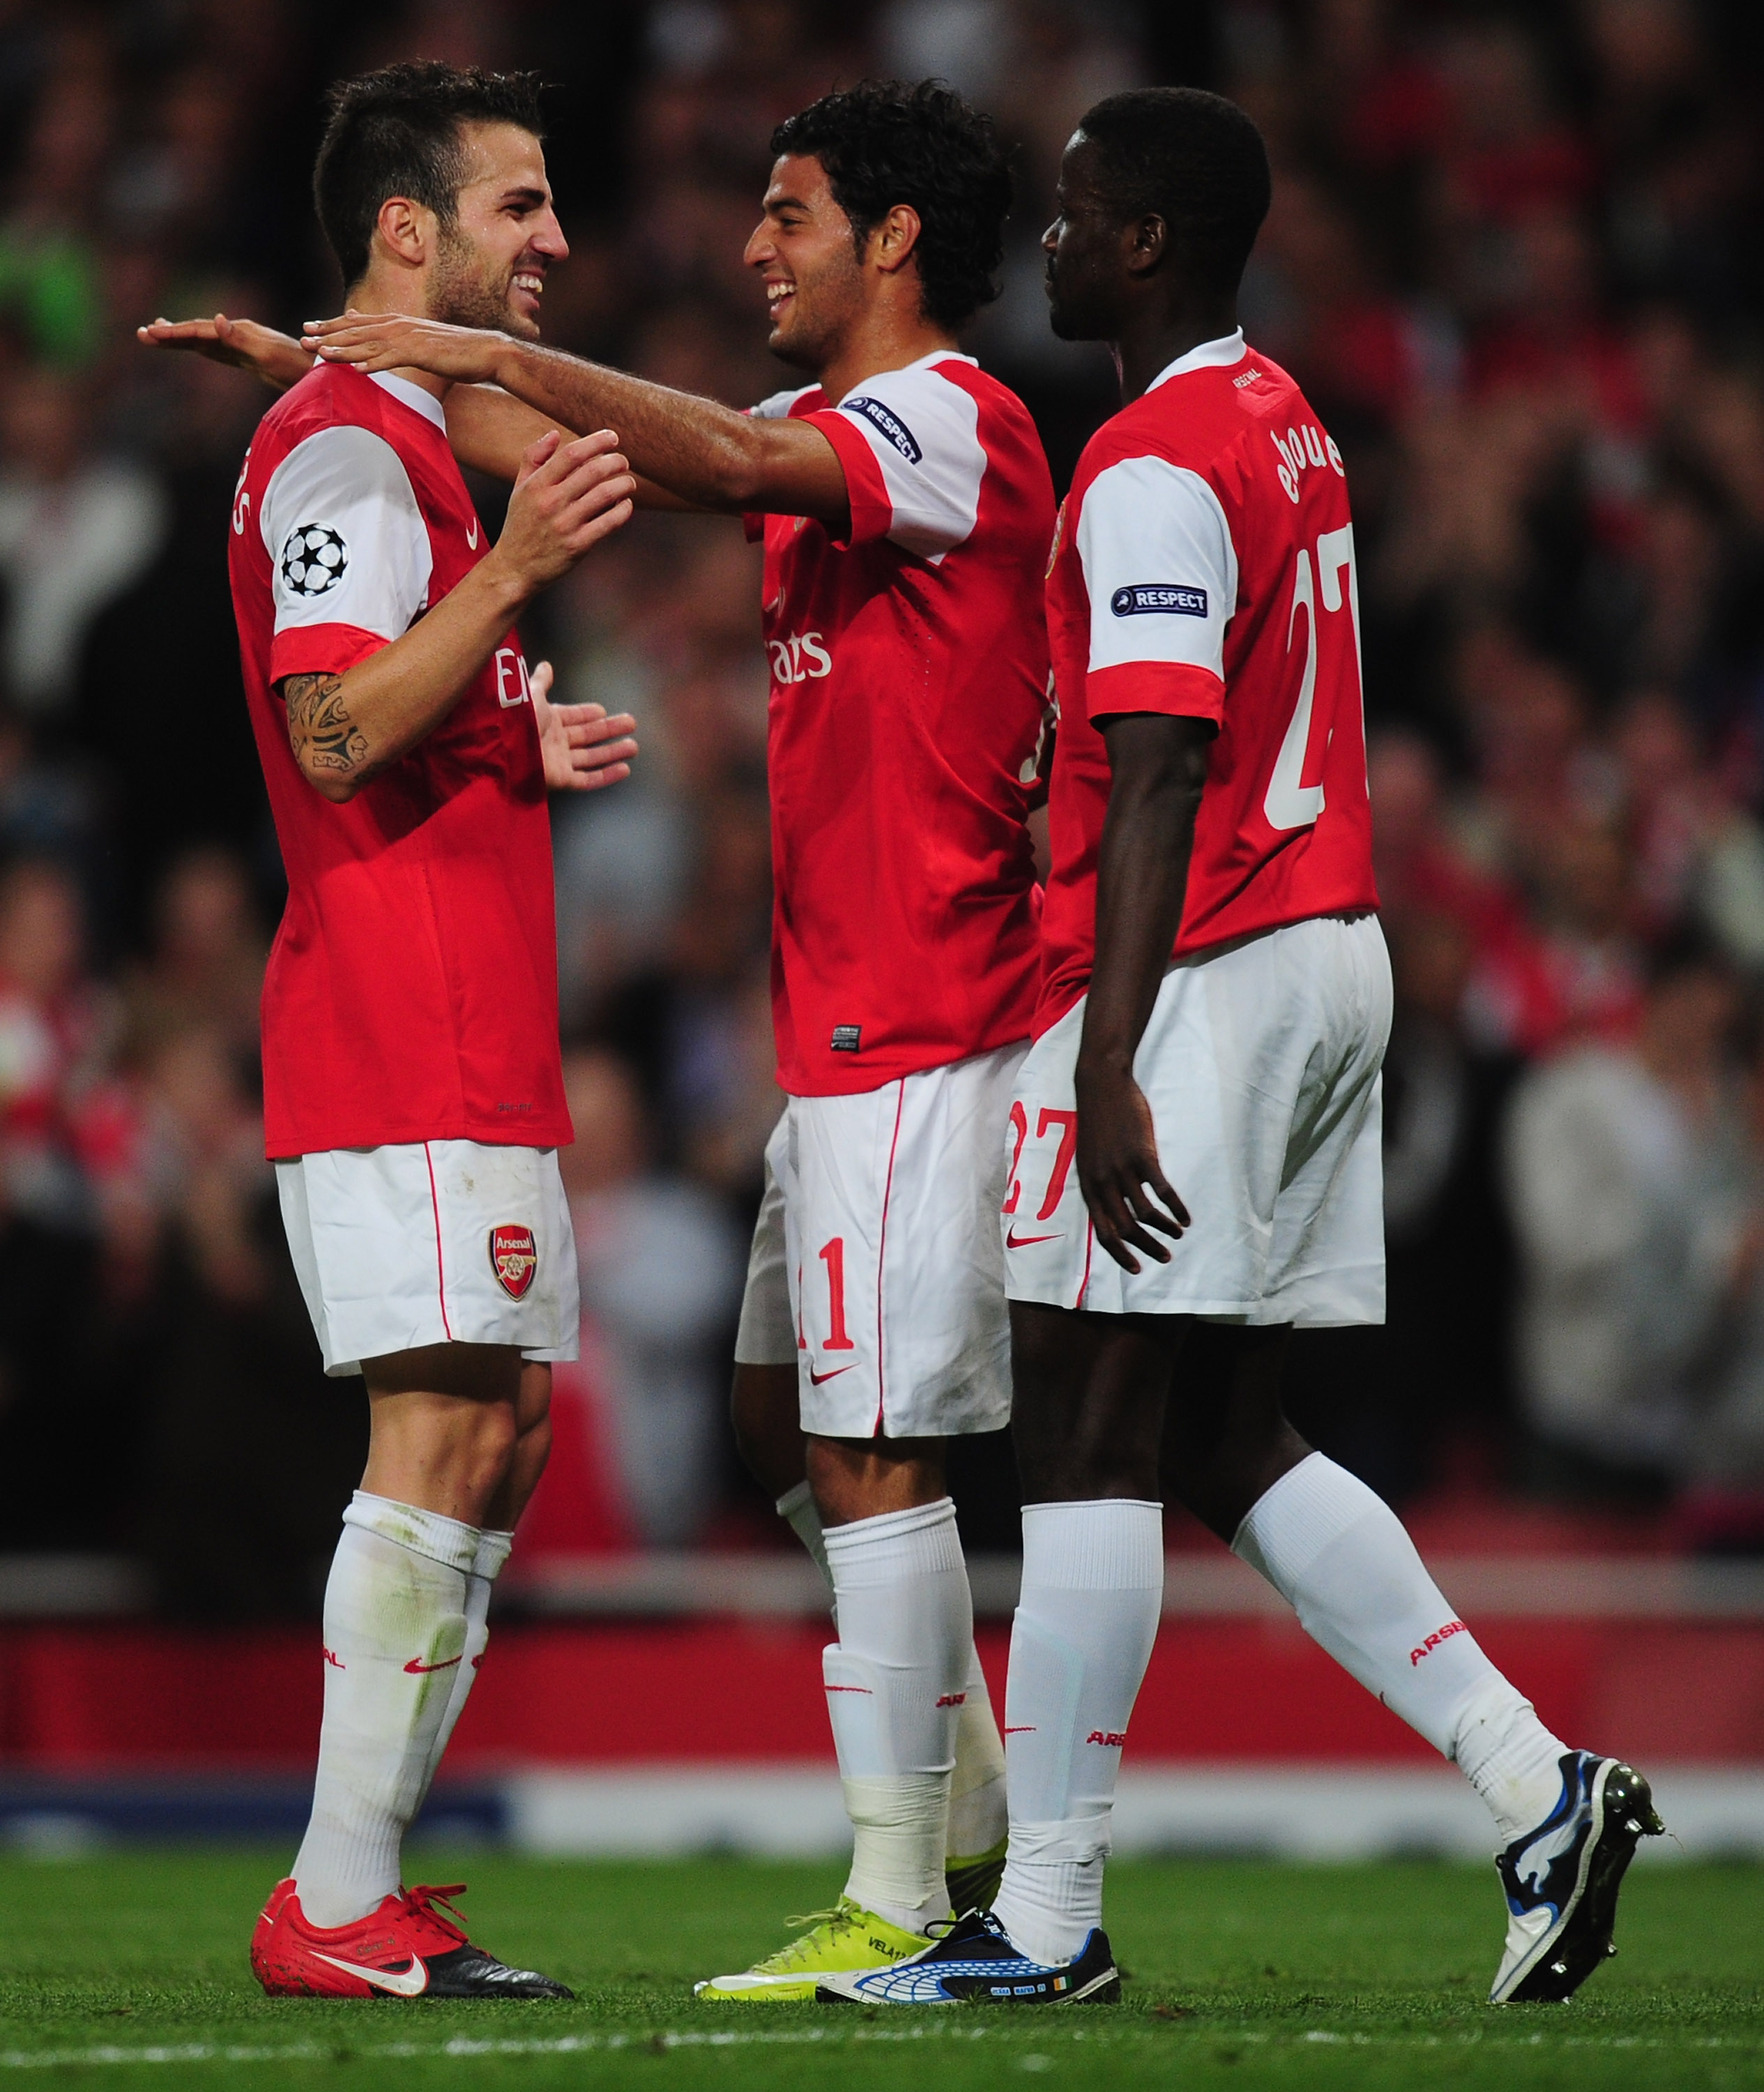 LONDON, ENGLAND - SEPTEMBER 15:  Carlos Vela of Arsenal celebrates with team mate Cesc Fabregas after scoring his teams sixth goal during the UEFA Champions League Group H match between Arsenal and SC Braga at the Emirates Stadium on September 15, 2010 in